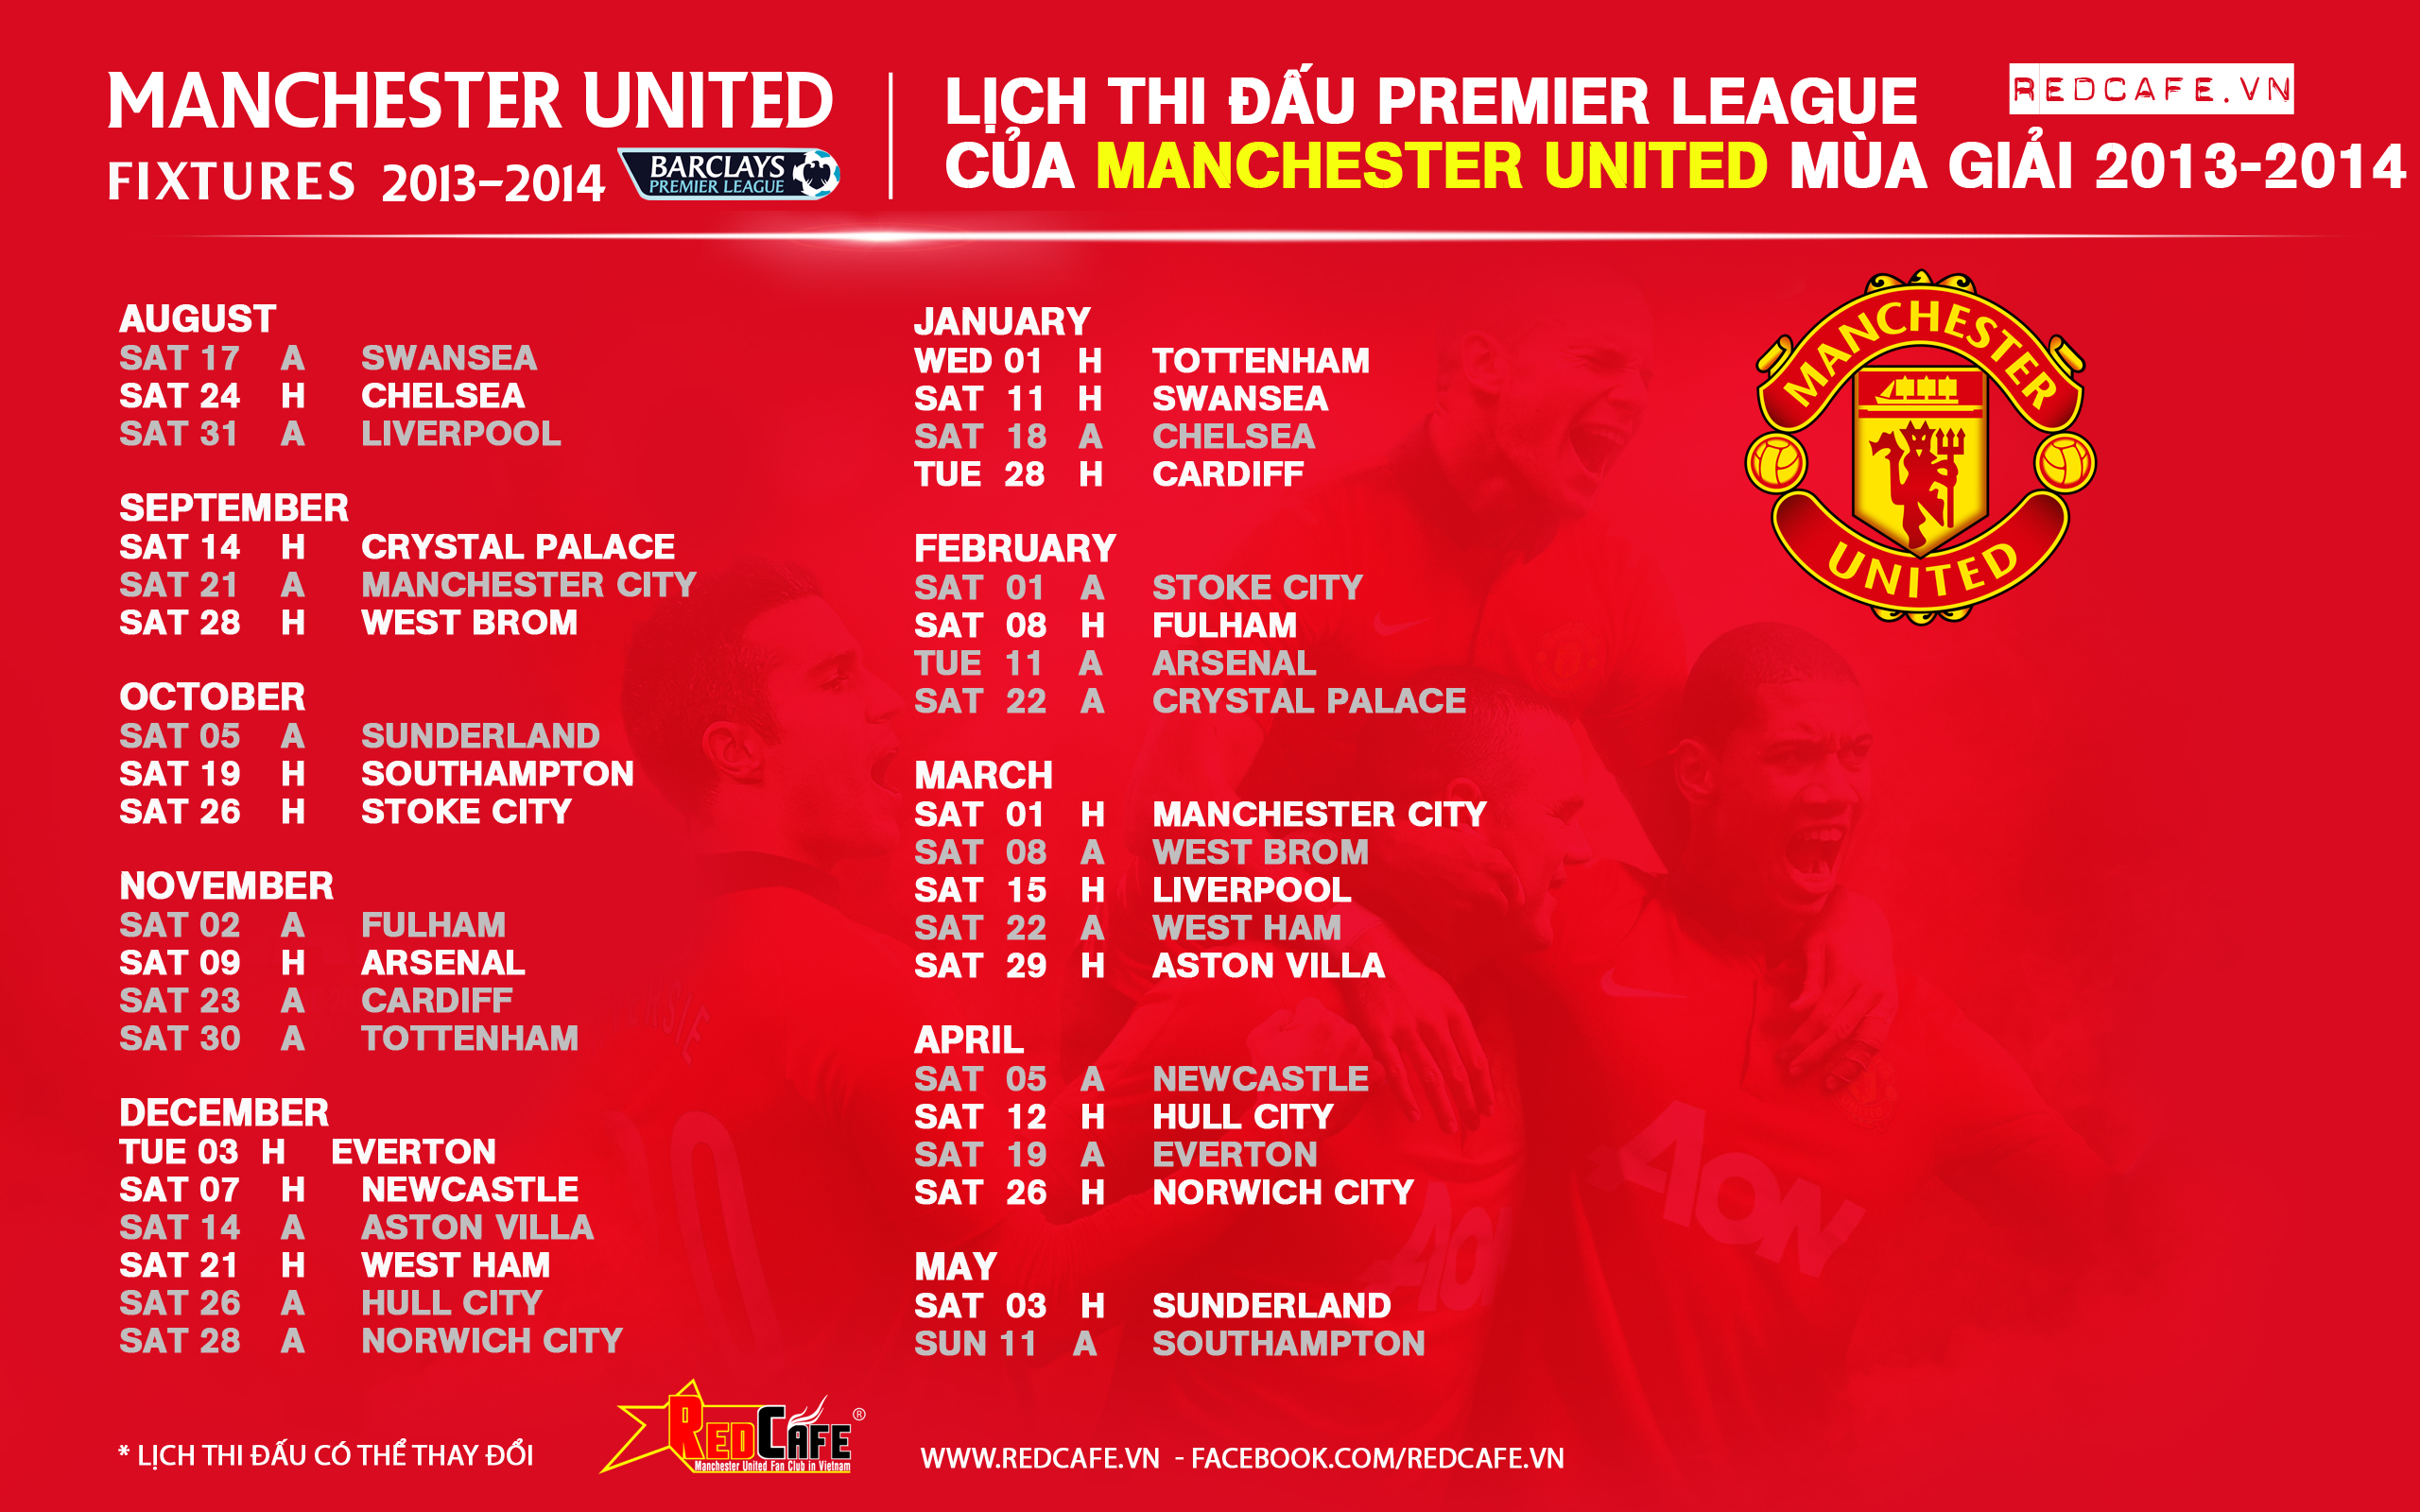 Manchester united football club fixtures waterford